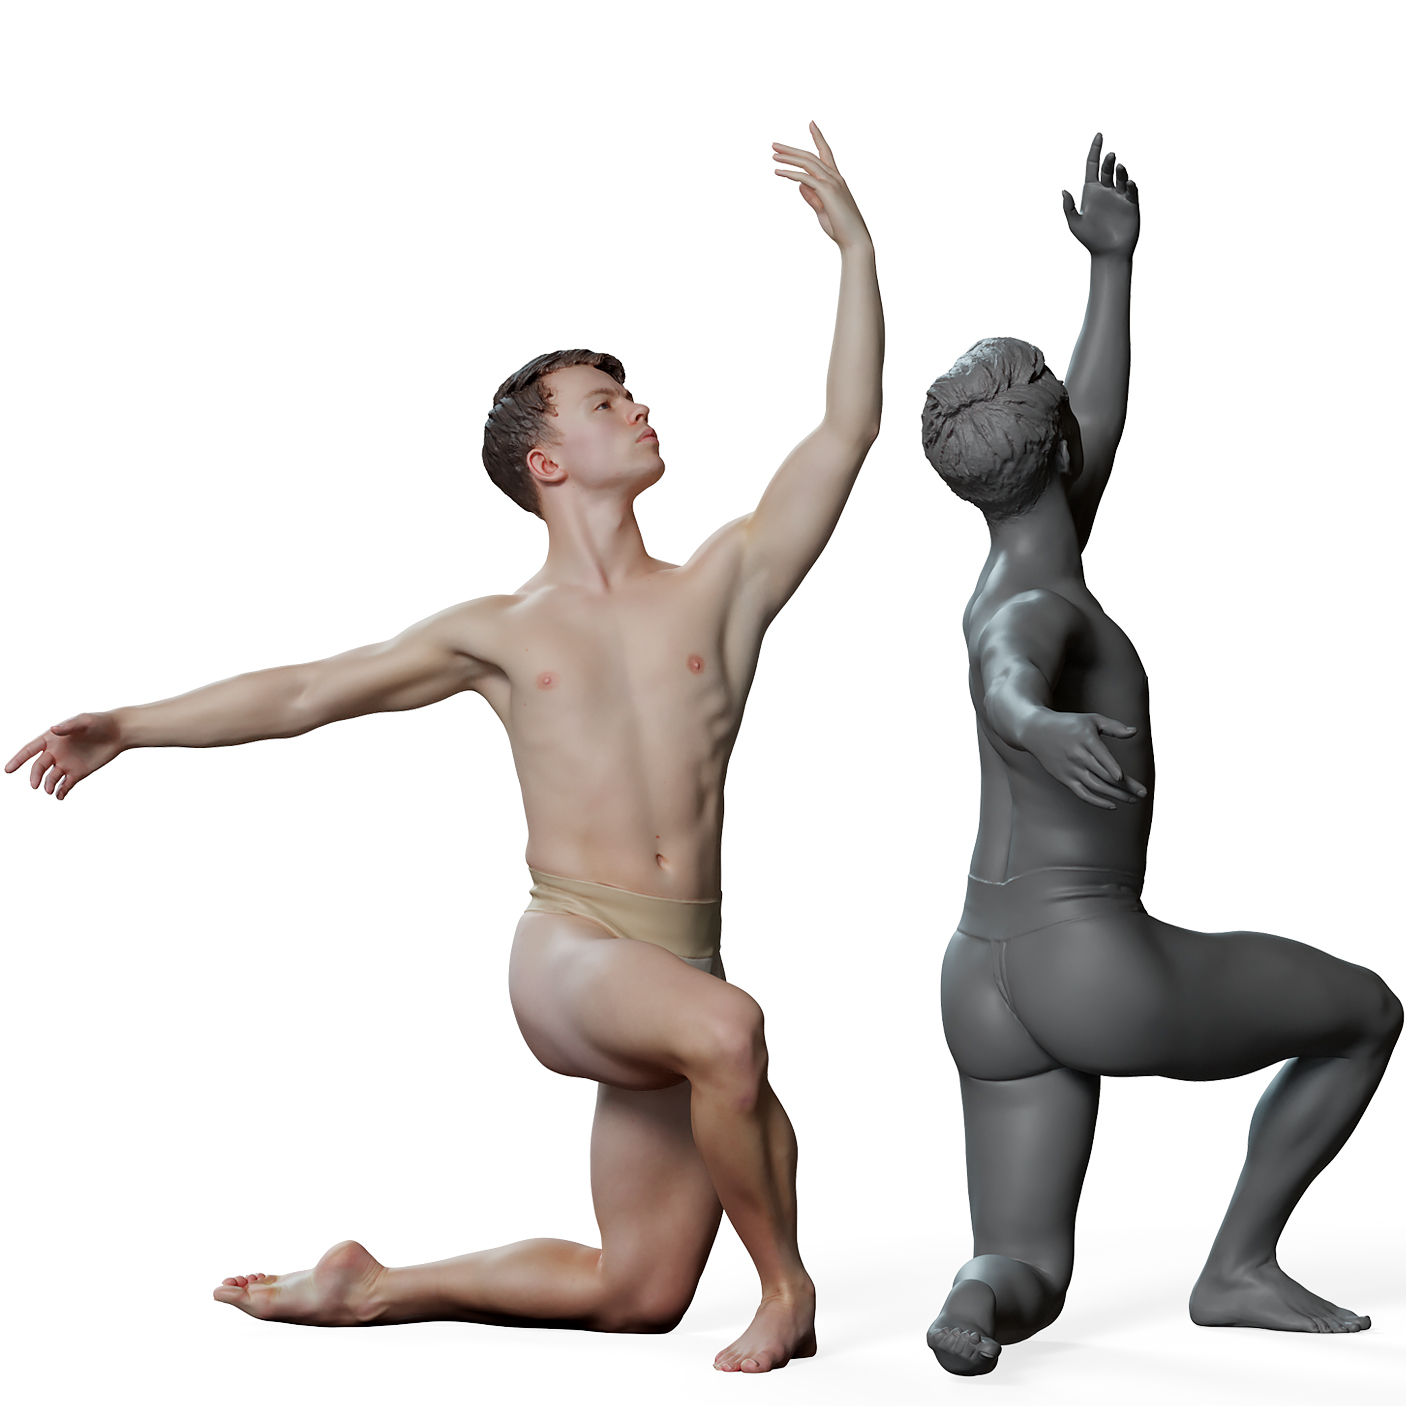 Modern dance - Young male performing a dance move - Stock Image - Everypixel